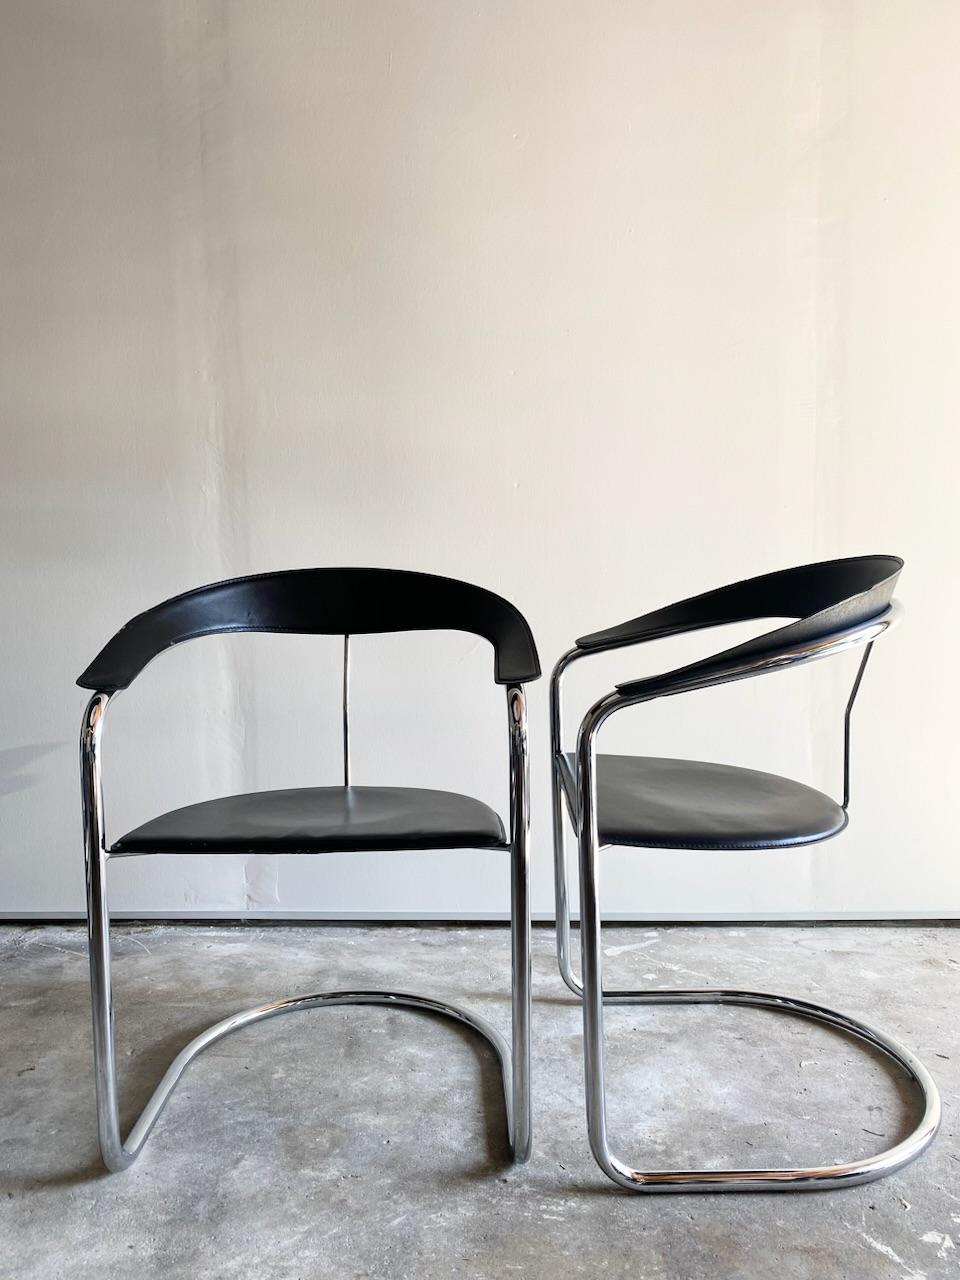 Minimalist, elegant Canasta chair, manufactured by the Italian Arrben manufacturer during the 1970s. Chrome cantilever, exquisite leather that wraps the frame, hand stitched, no detail is unnecessary. A confident and refined piece of minimalism.